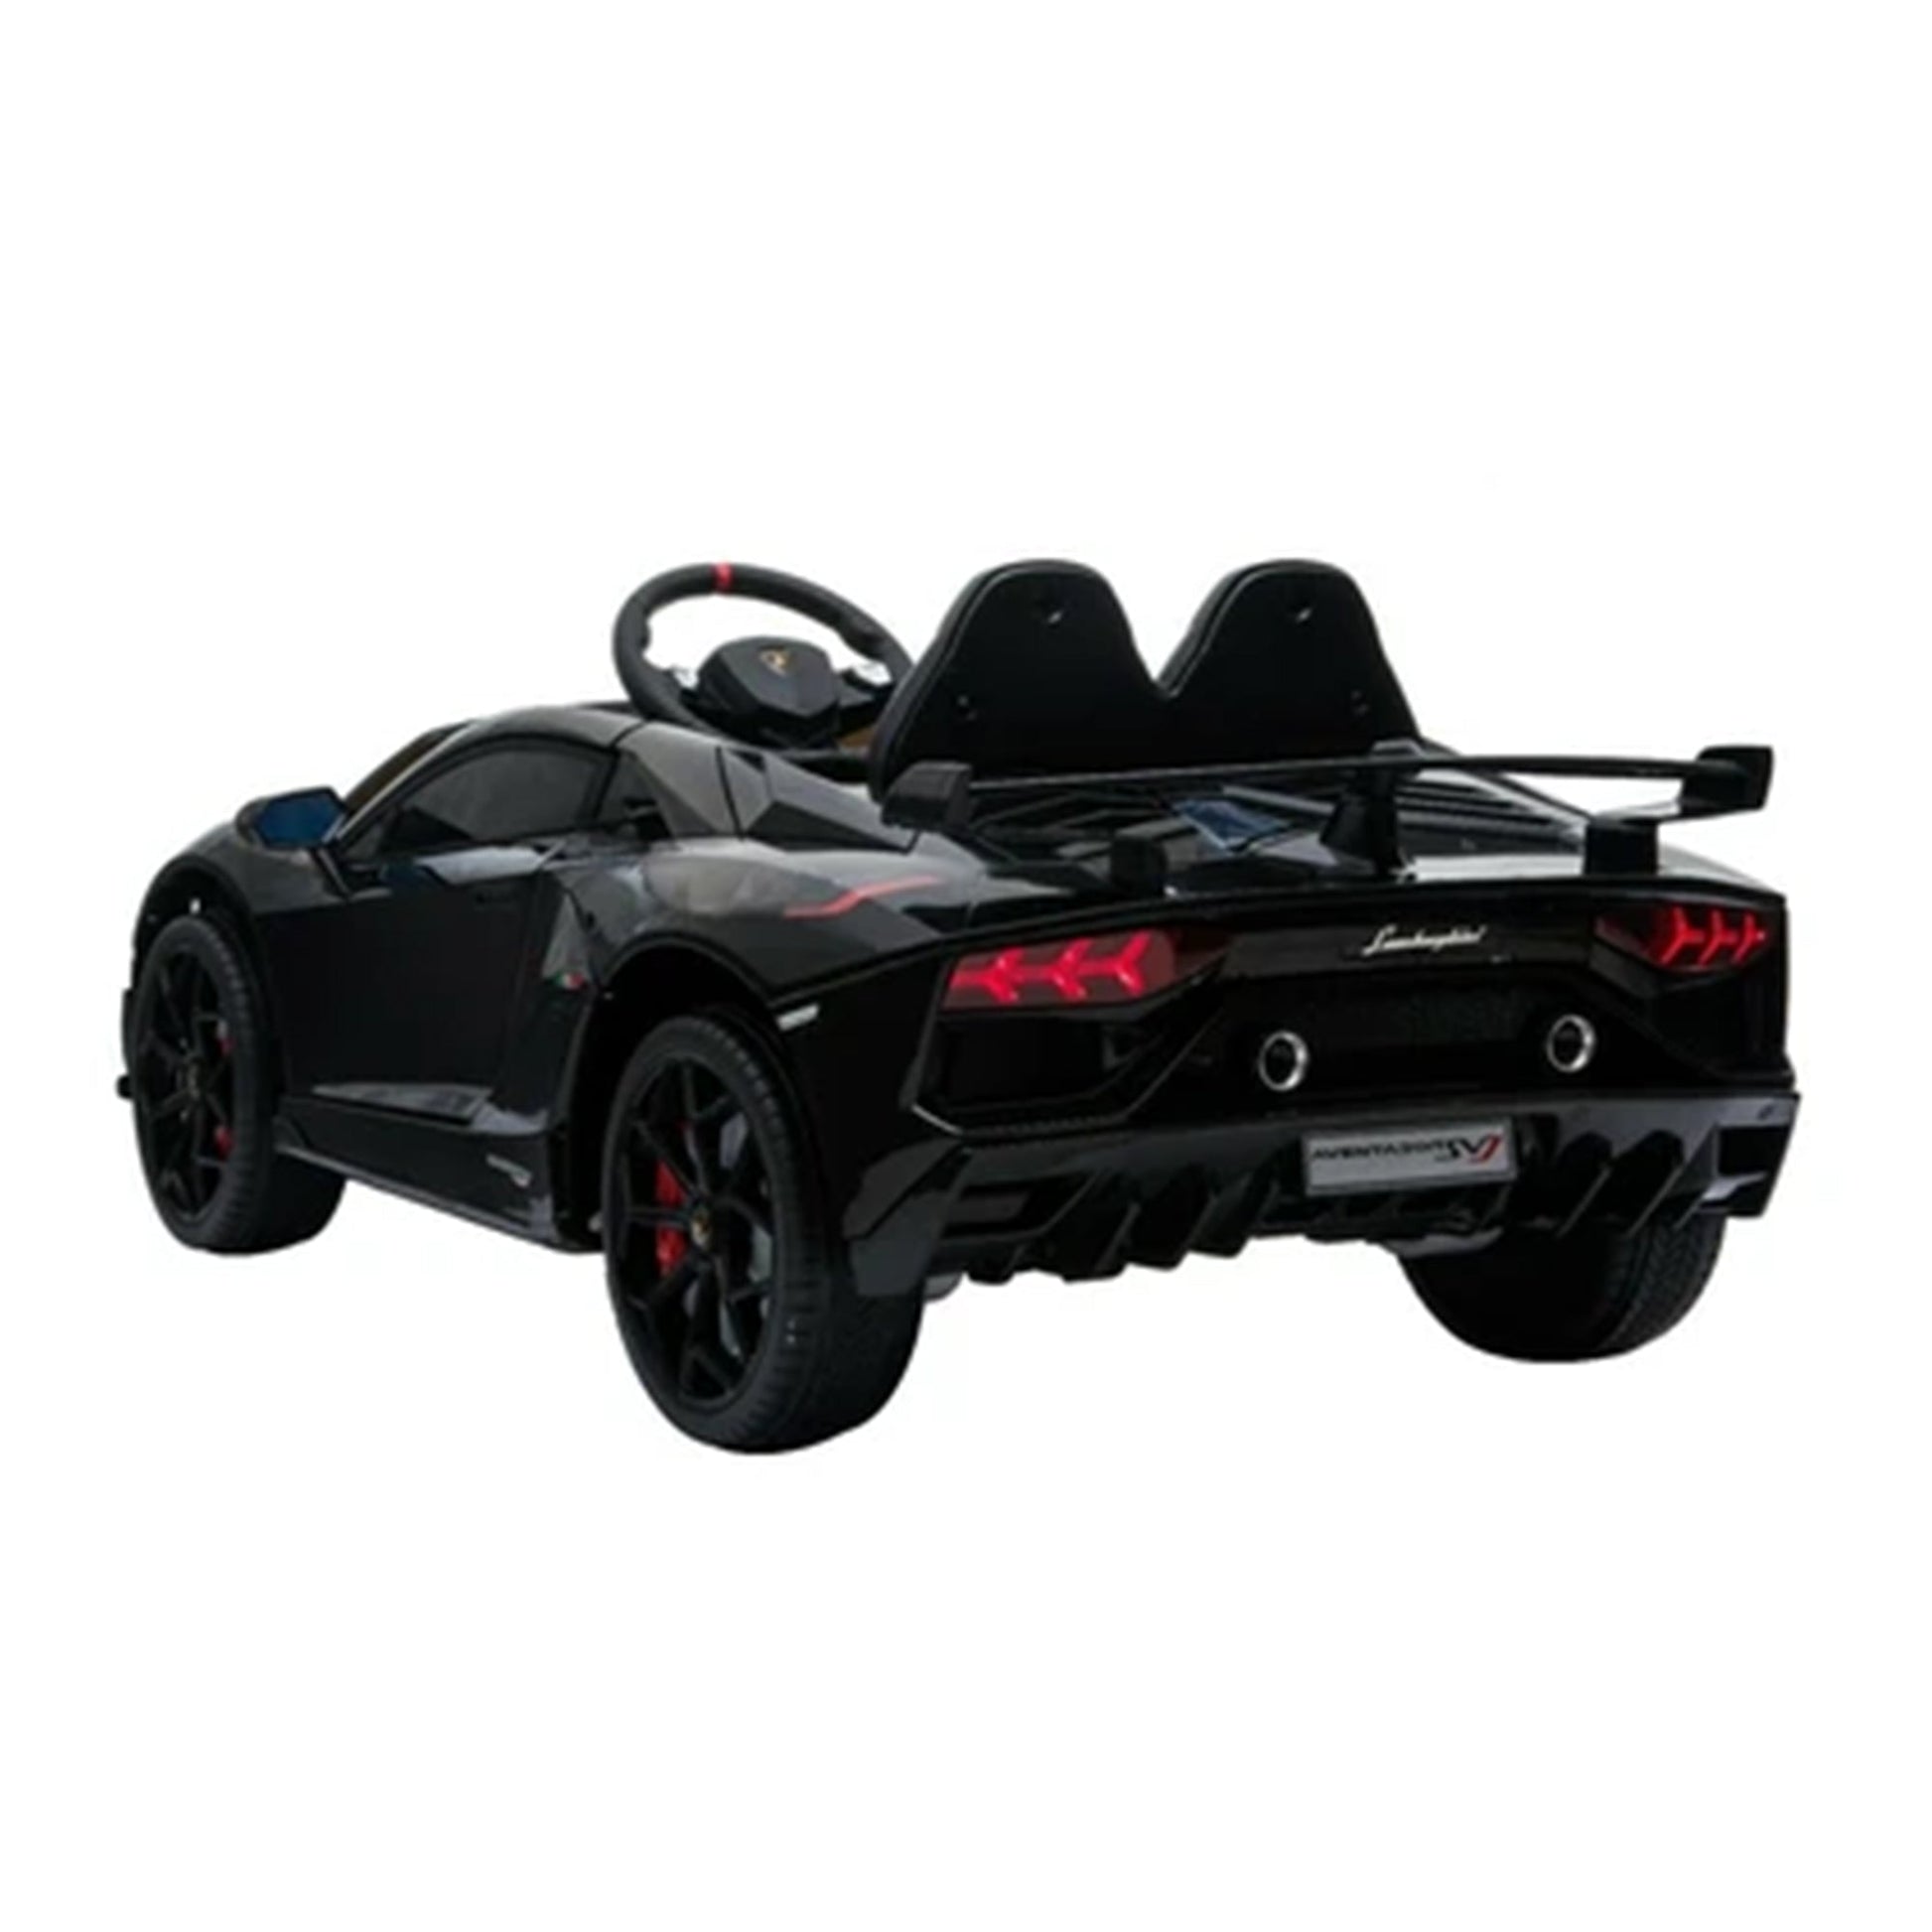 "Matt Black Lamborghini SVJ Kids Ride On from Kids CarA Store with 2.4G Parental Remote Control, 12-volt rechargeable battery on a white background."